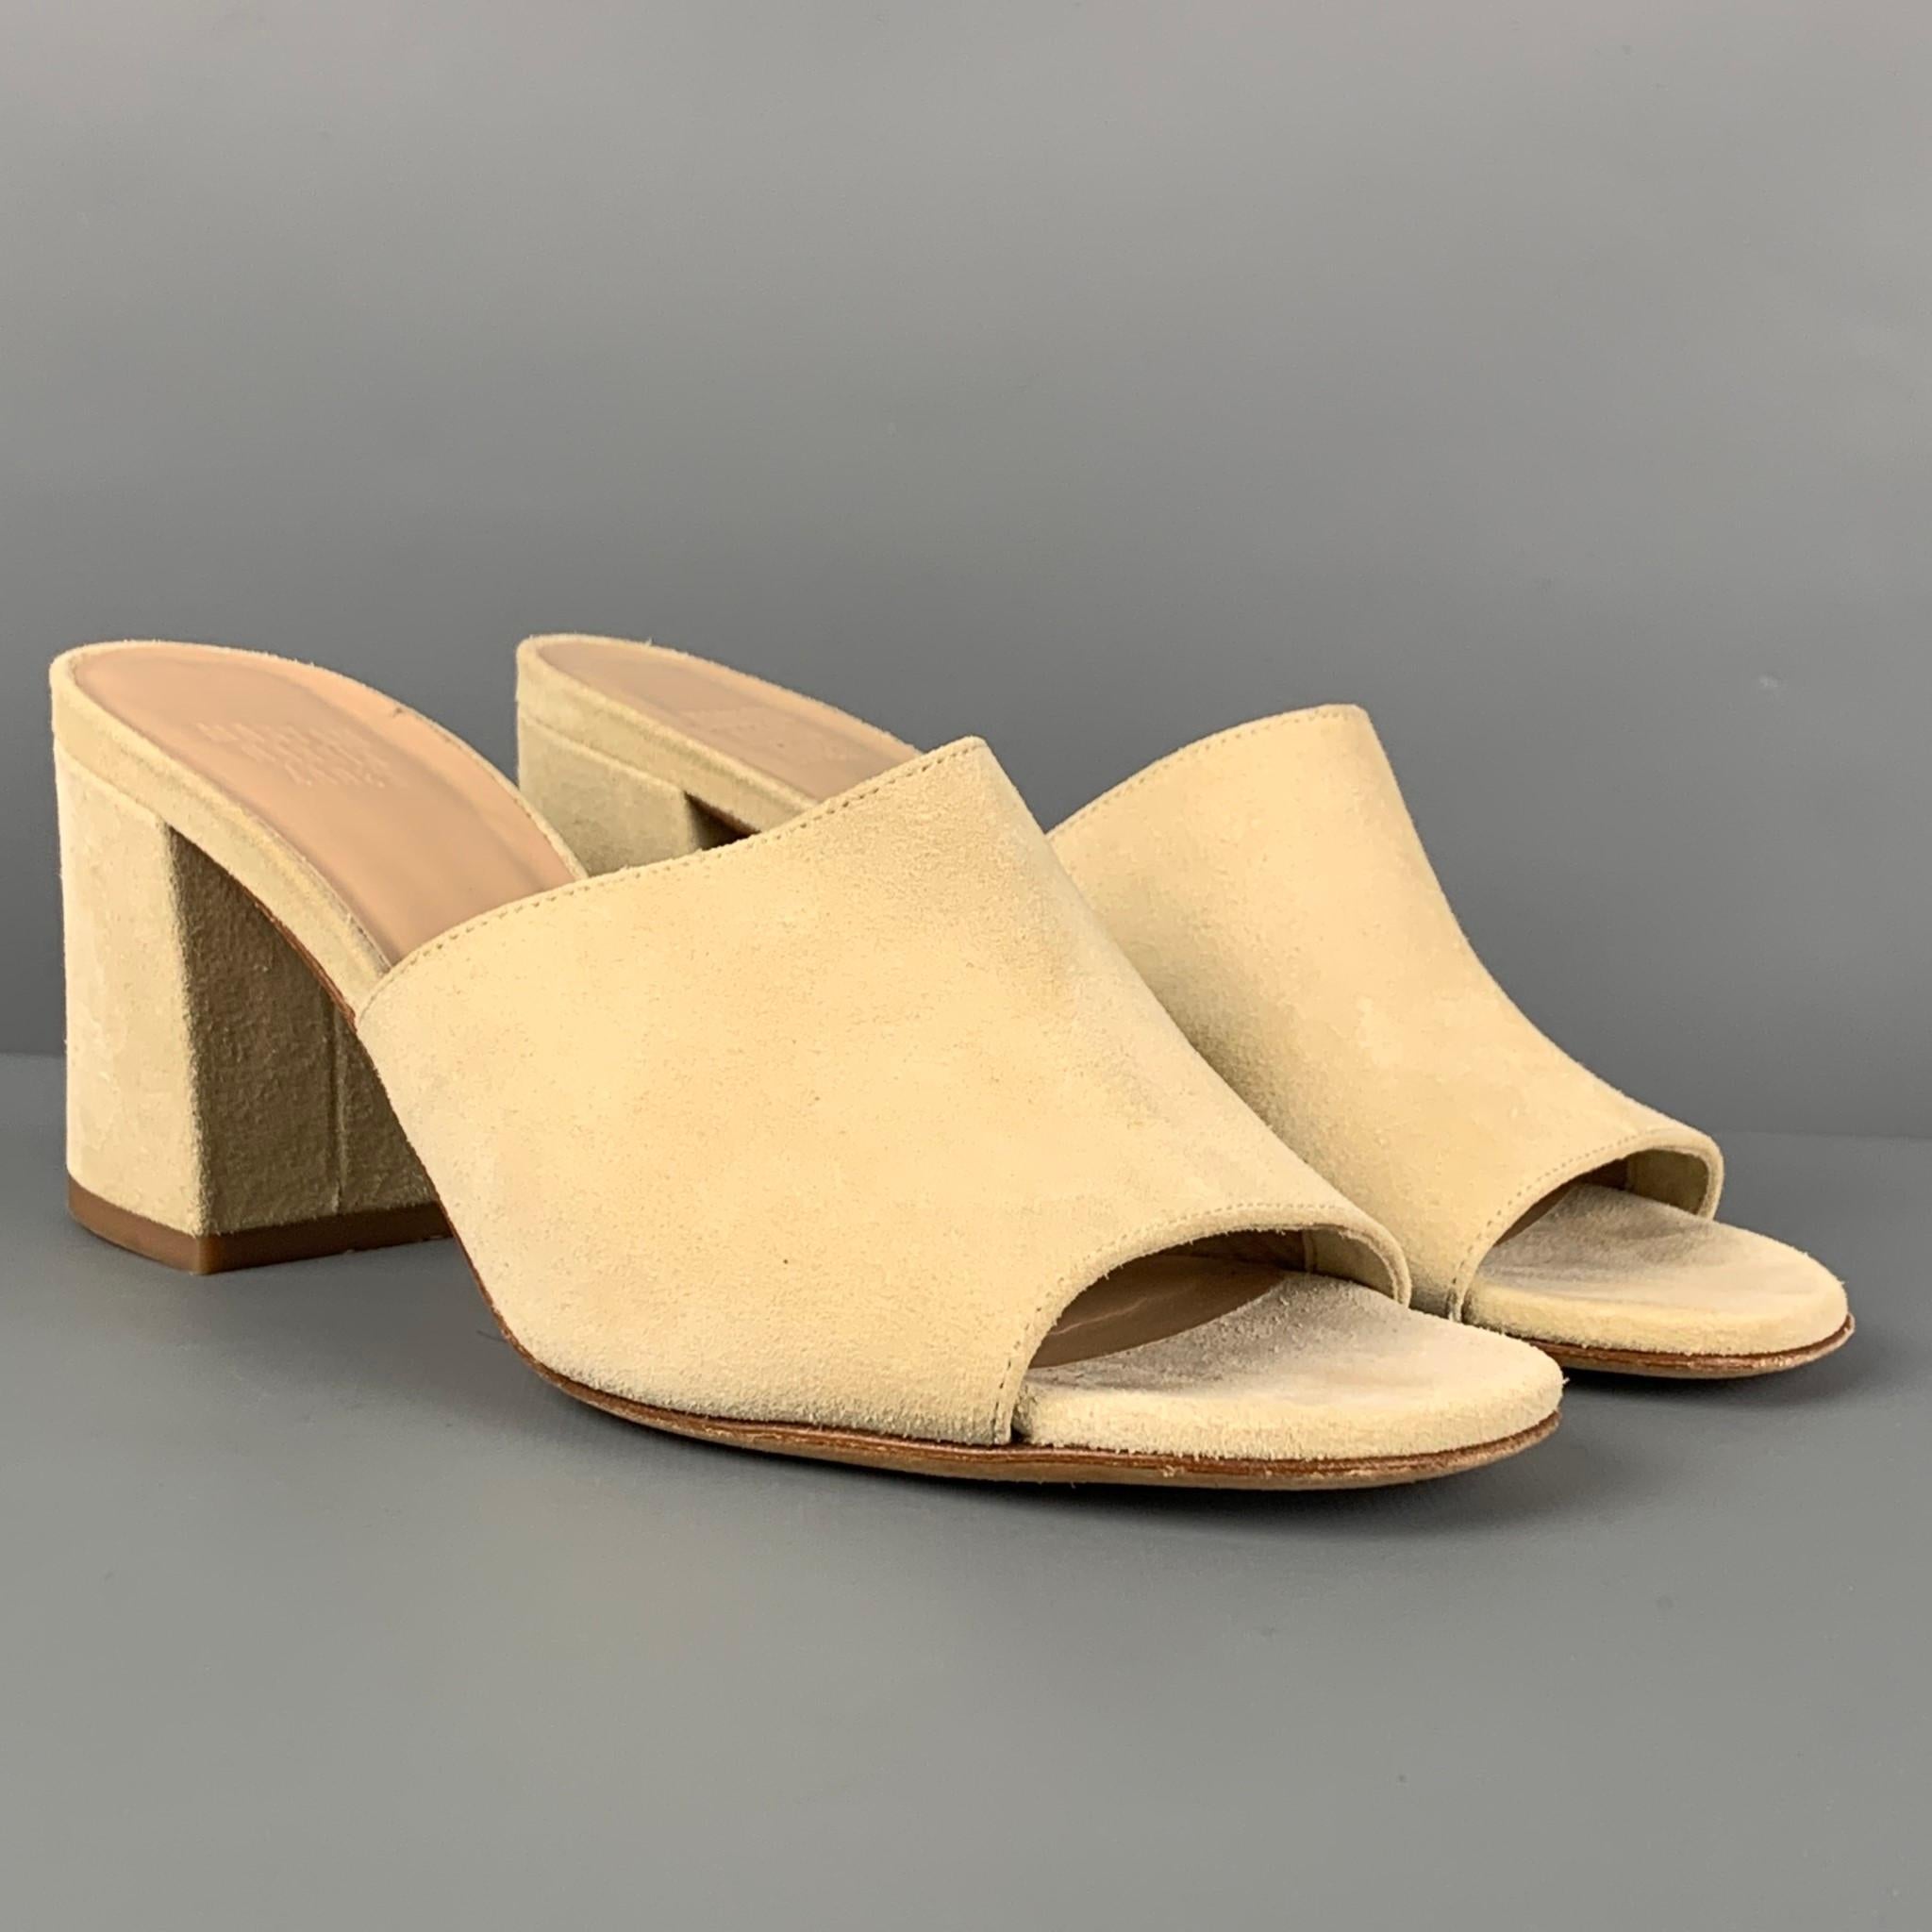 MARYAM NASSIR ZADER sandals comes in a beige suede featuring a peep toe and a chunky heel. Made in Italy.

Very Good Pre-Owned Condition.
Marked: 37
Original Retail Price: $440.00

Measurements:

Heel: 2.5 in.  